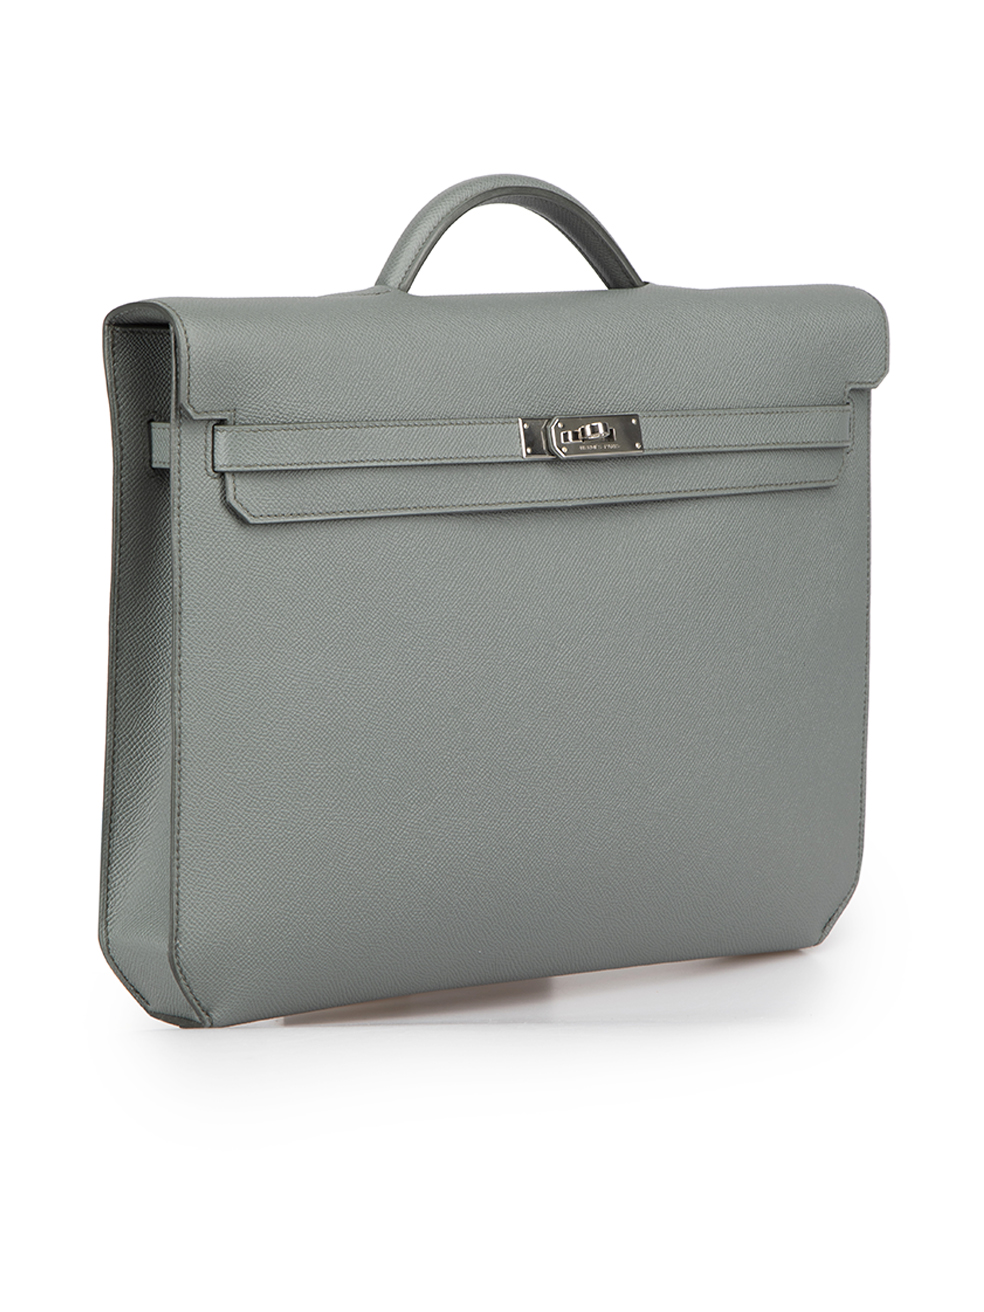 Used Hermès 2020 Vert Amande Epsom Leather Kelly Depeches 36 Briefcase